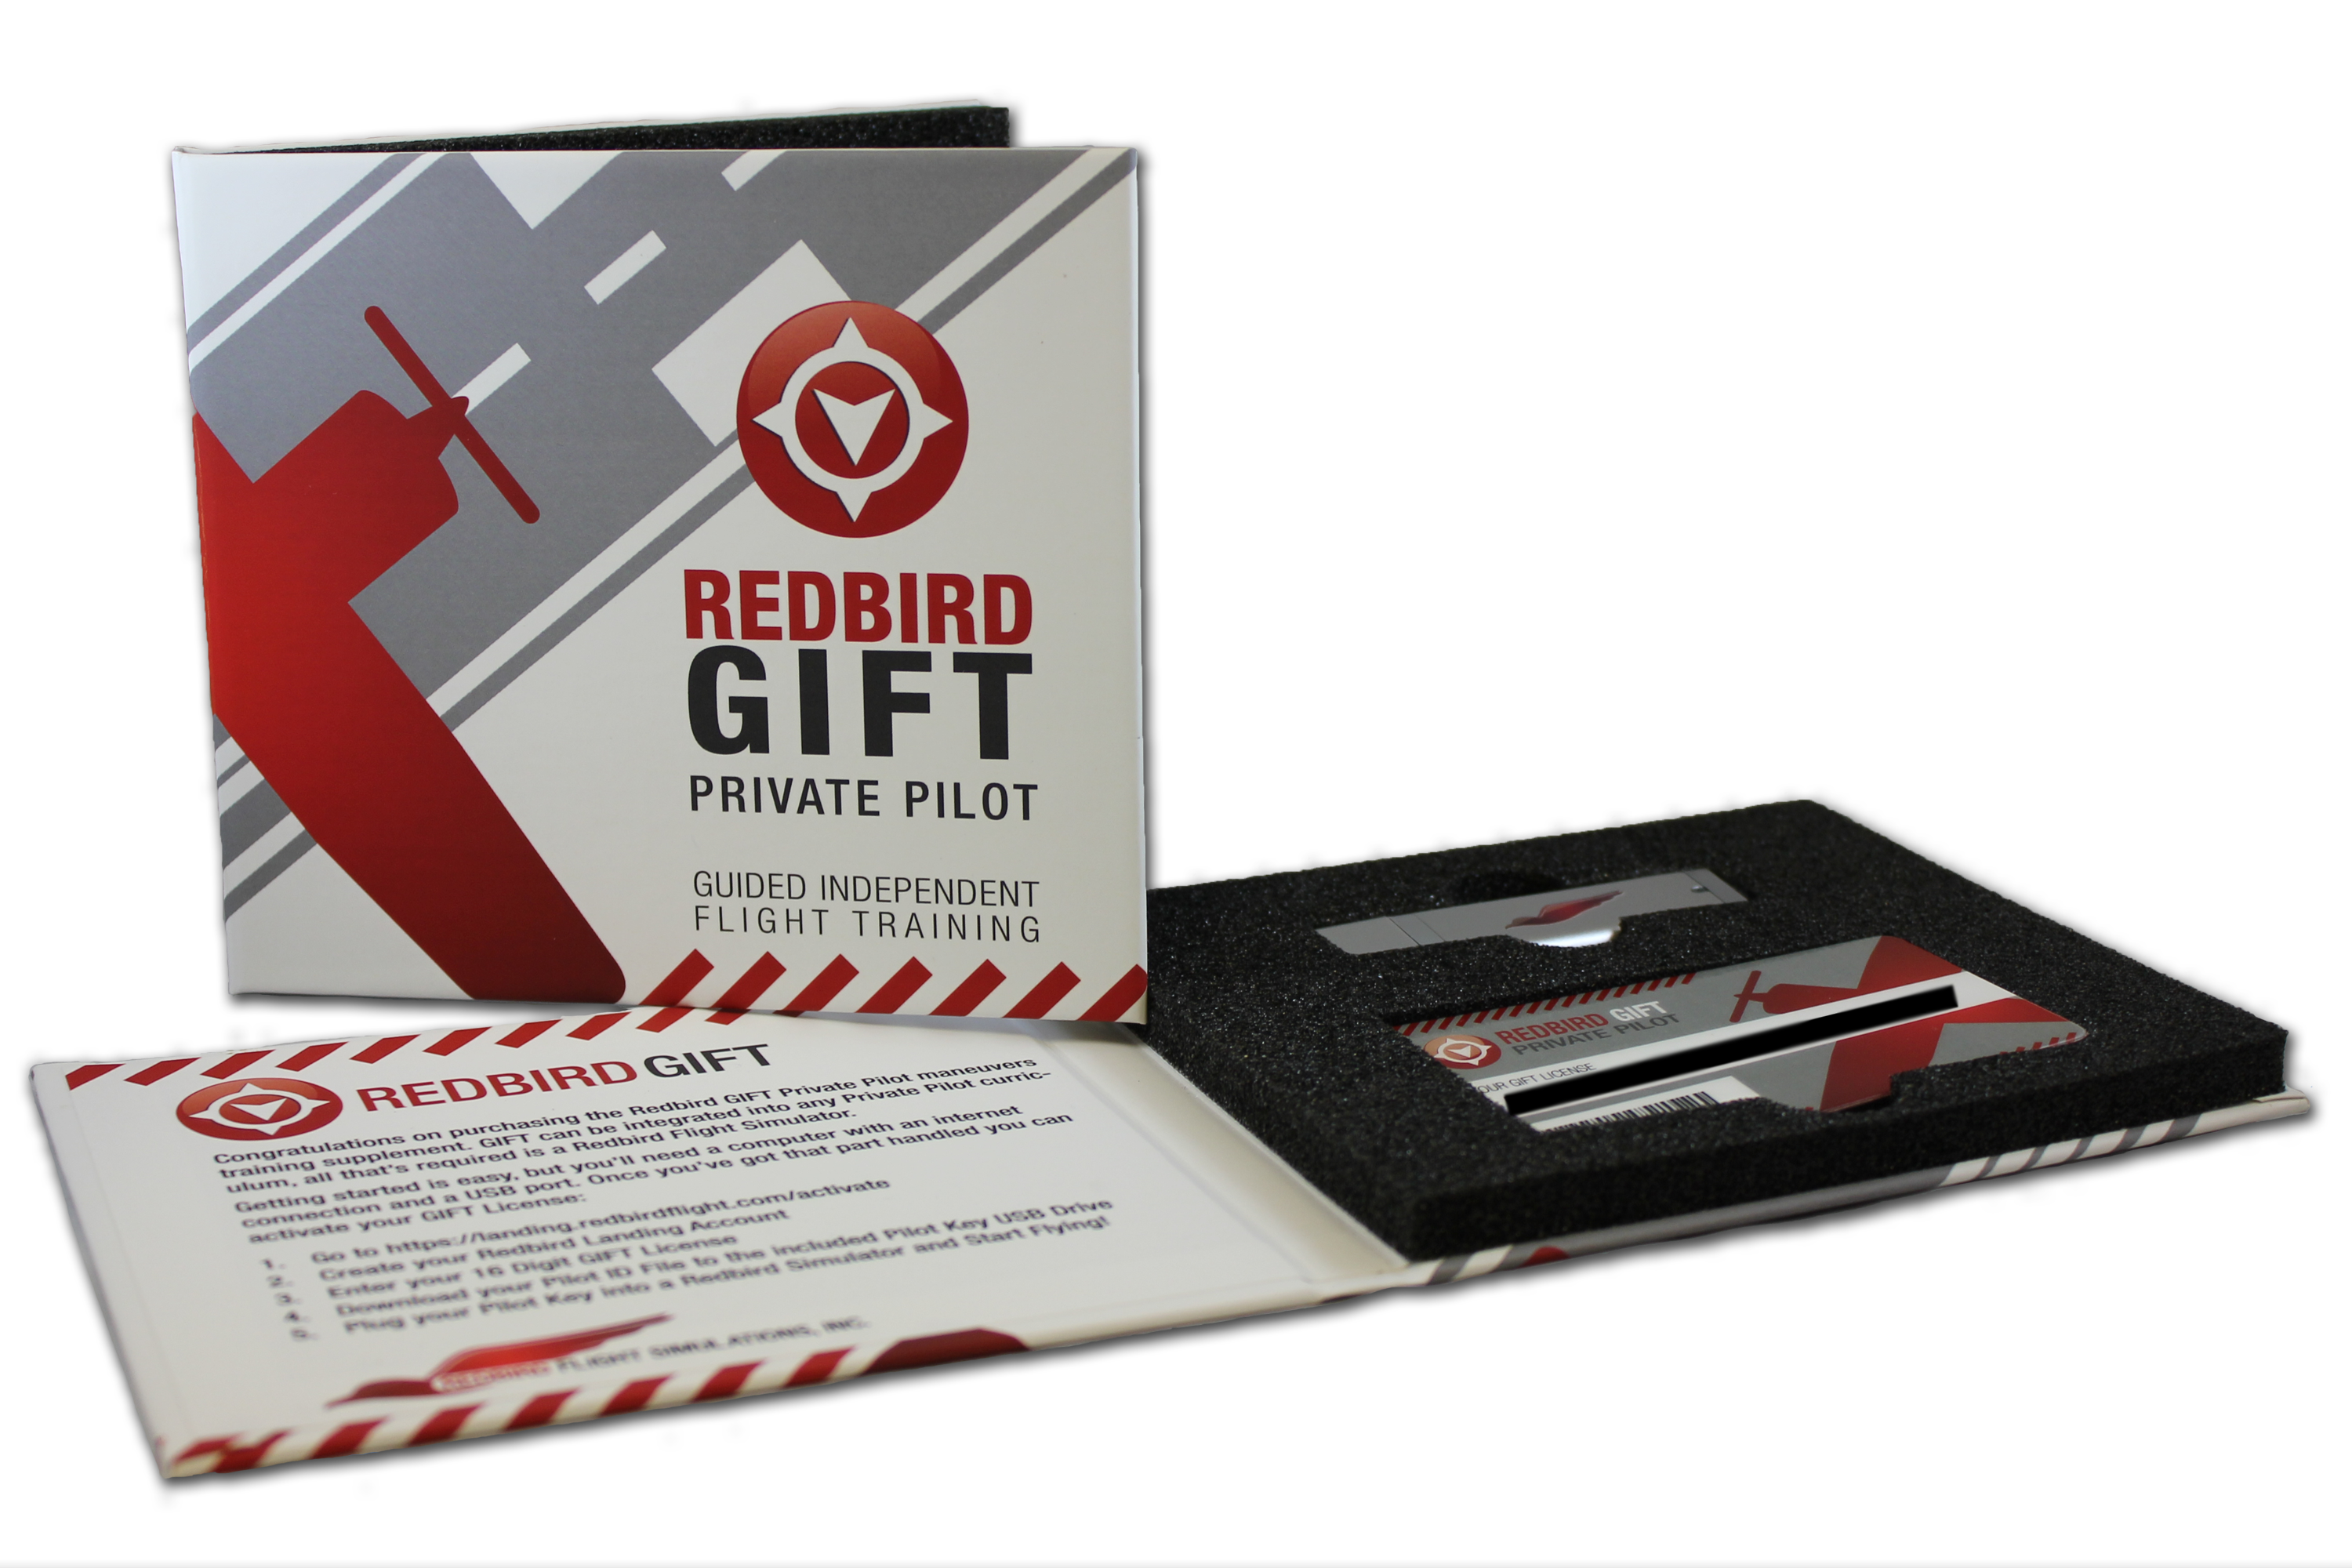 Redbird's Guided Independent Flight Training Software is Now Available